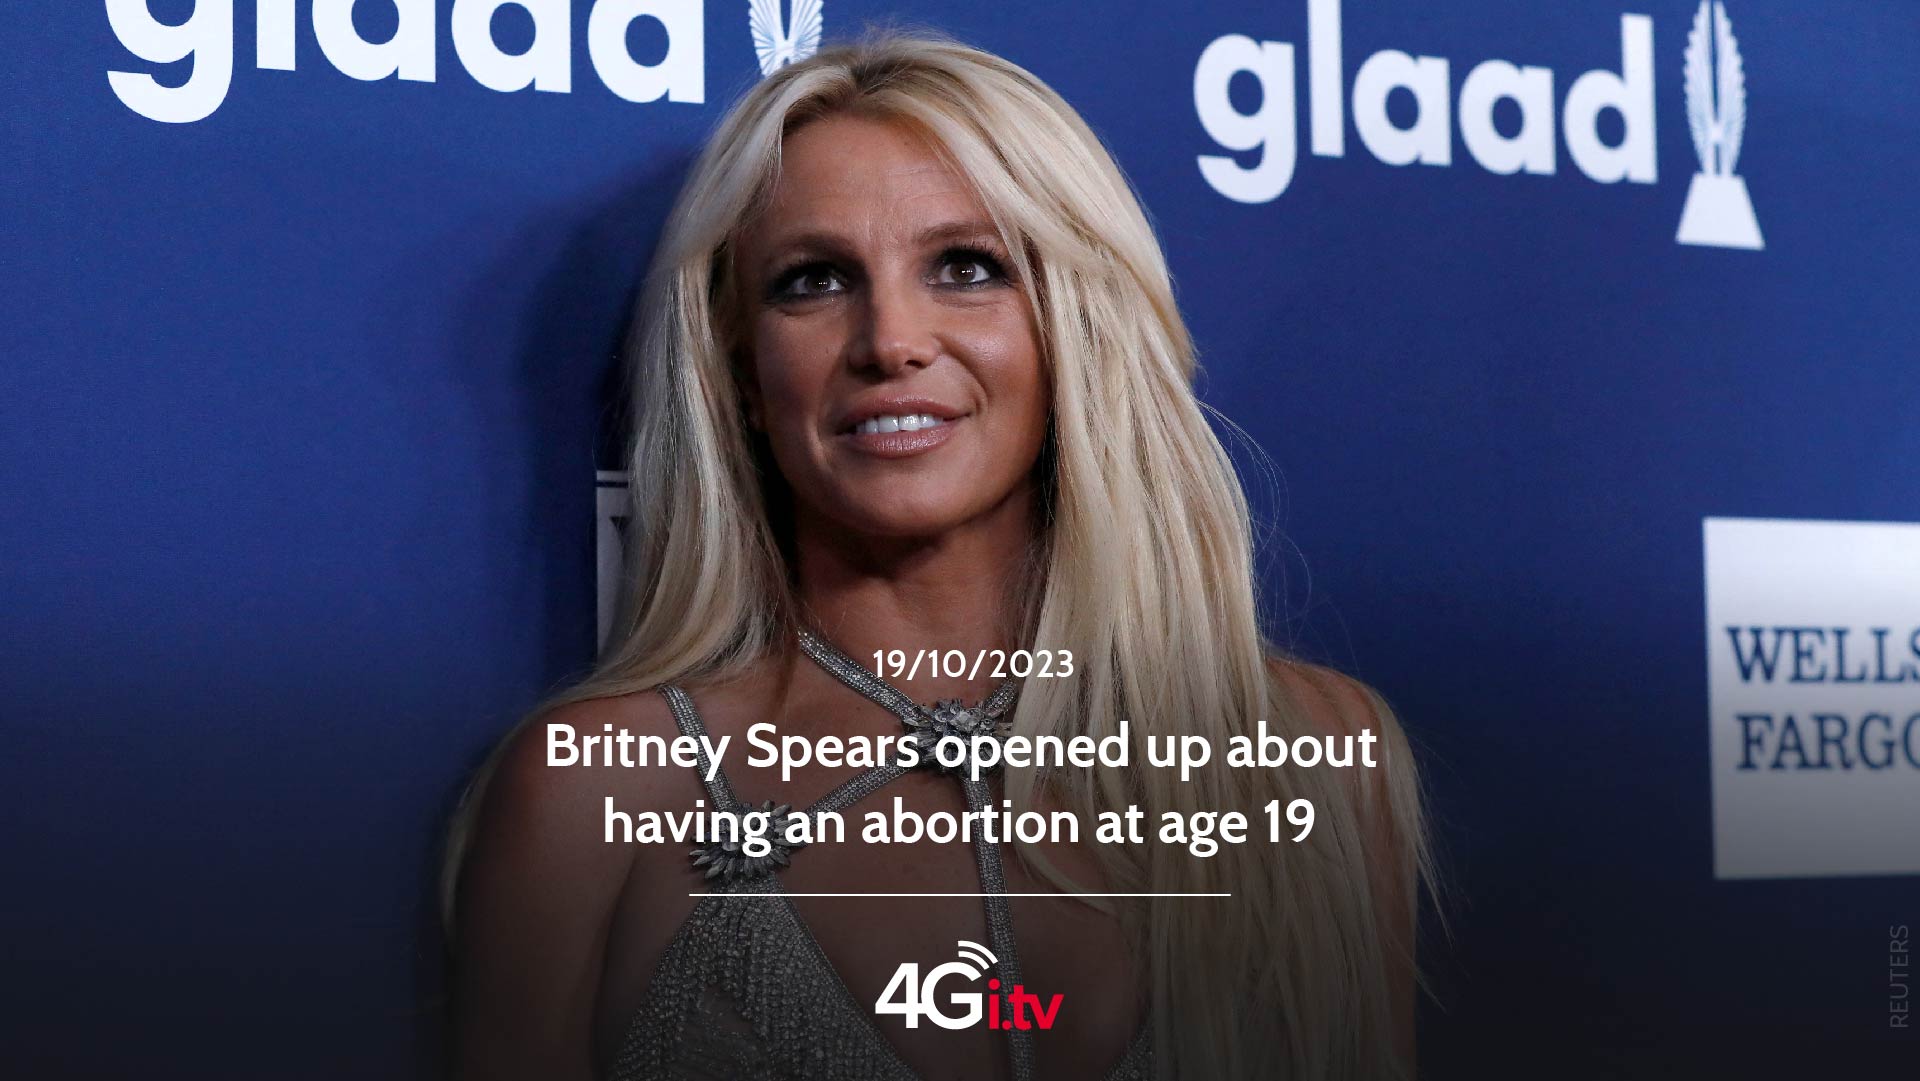 Подробнее о статье Britney Spears opened up about having an abortion at age 19